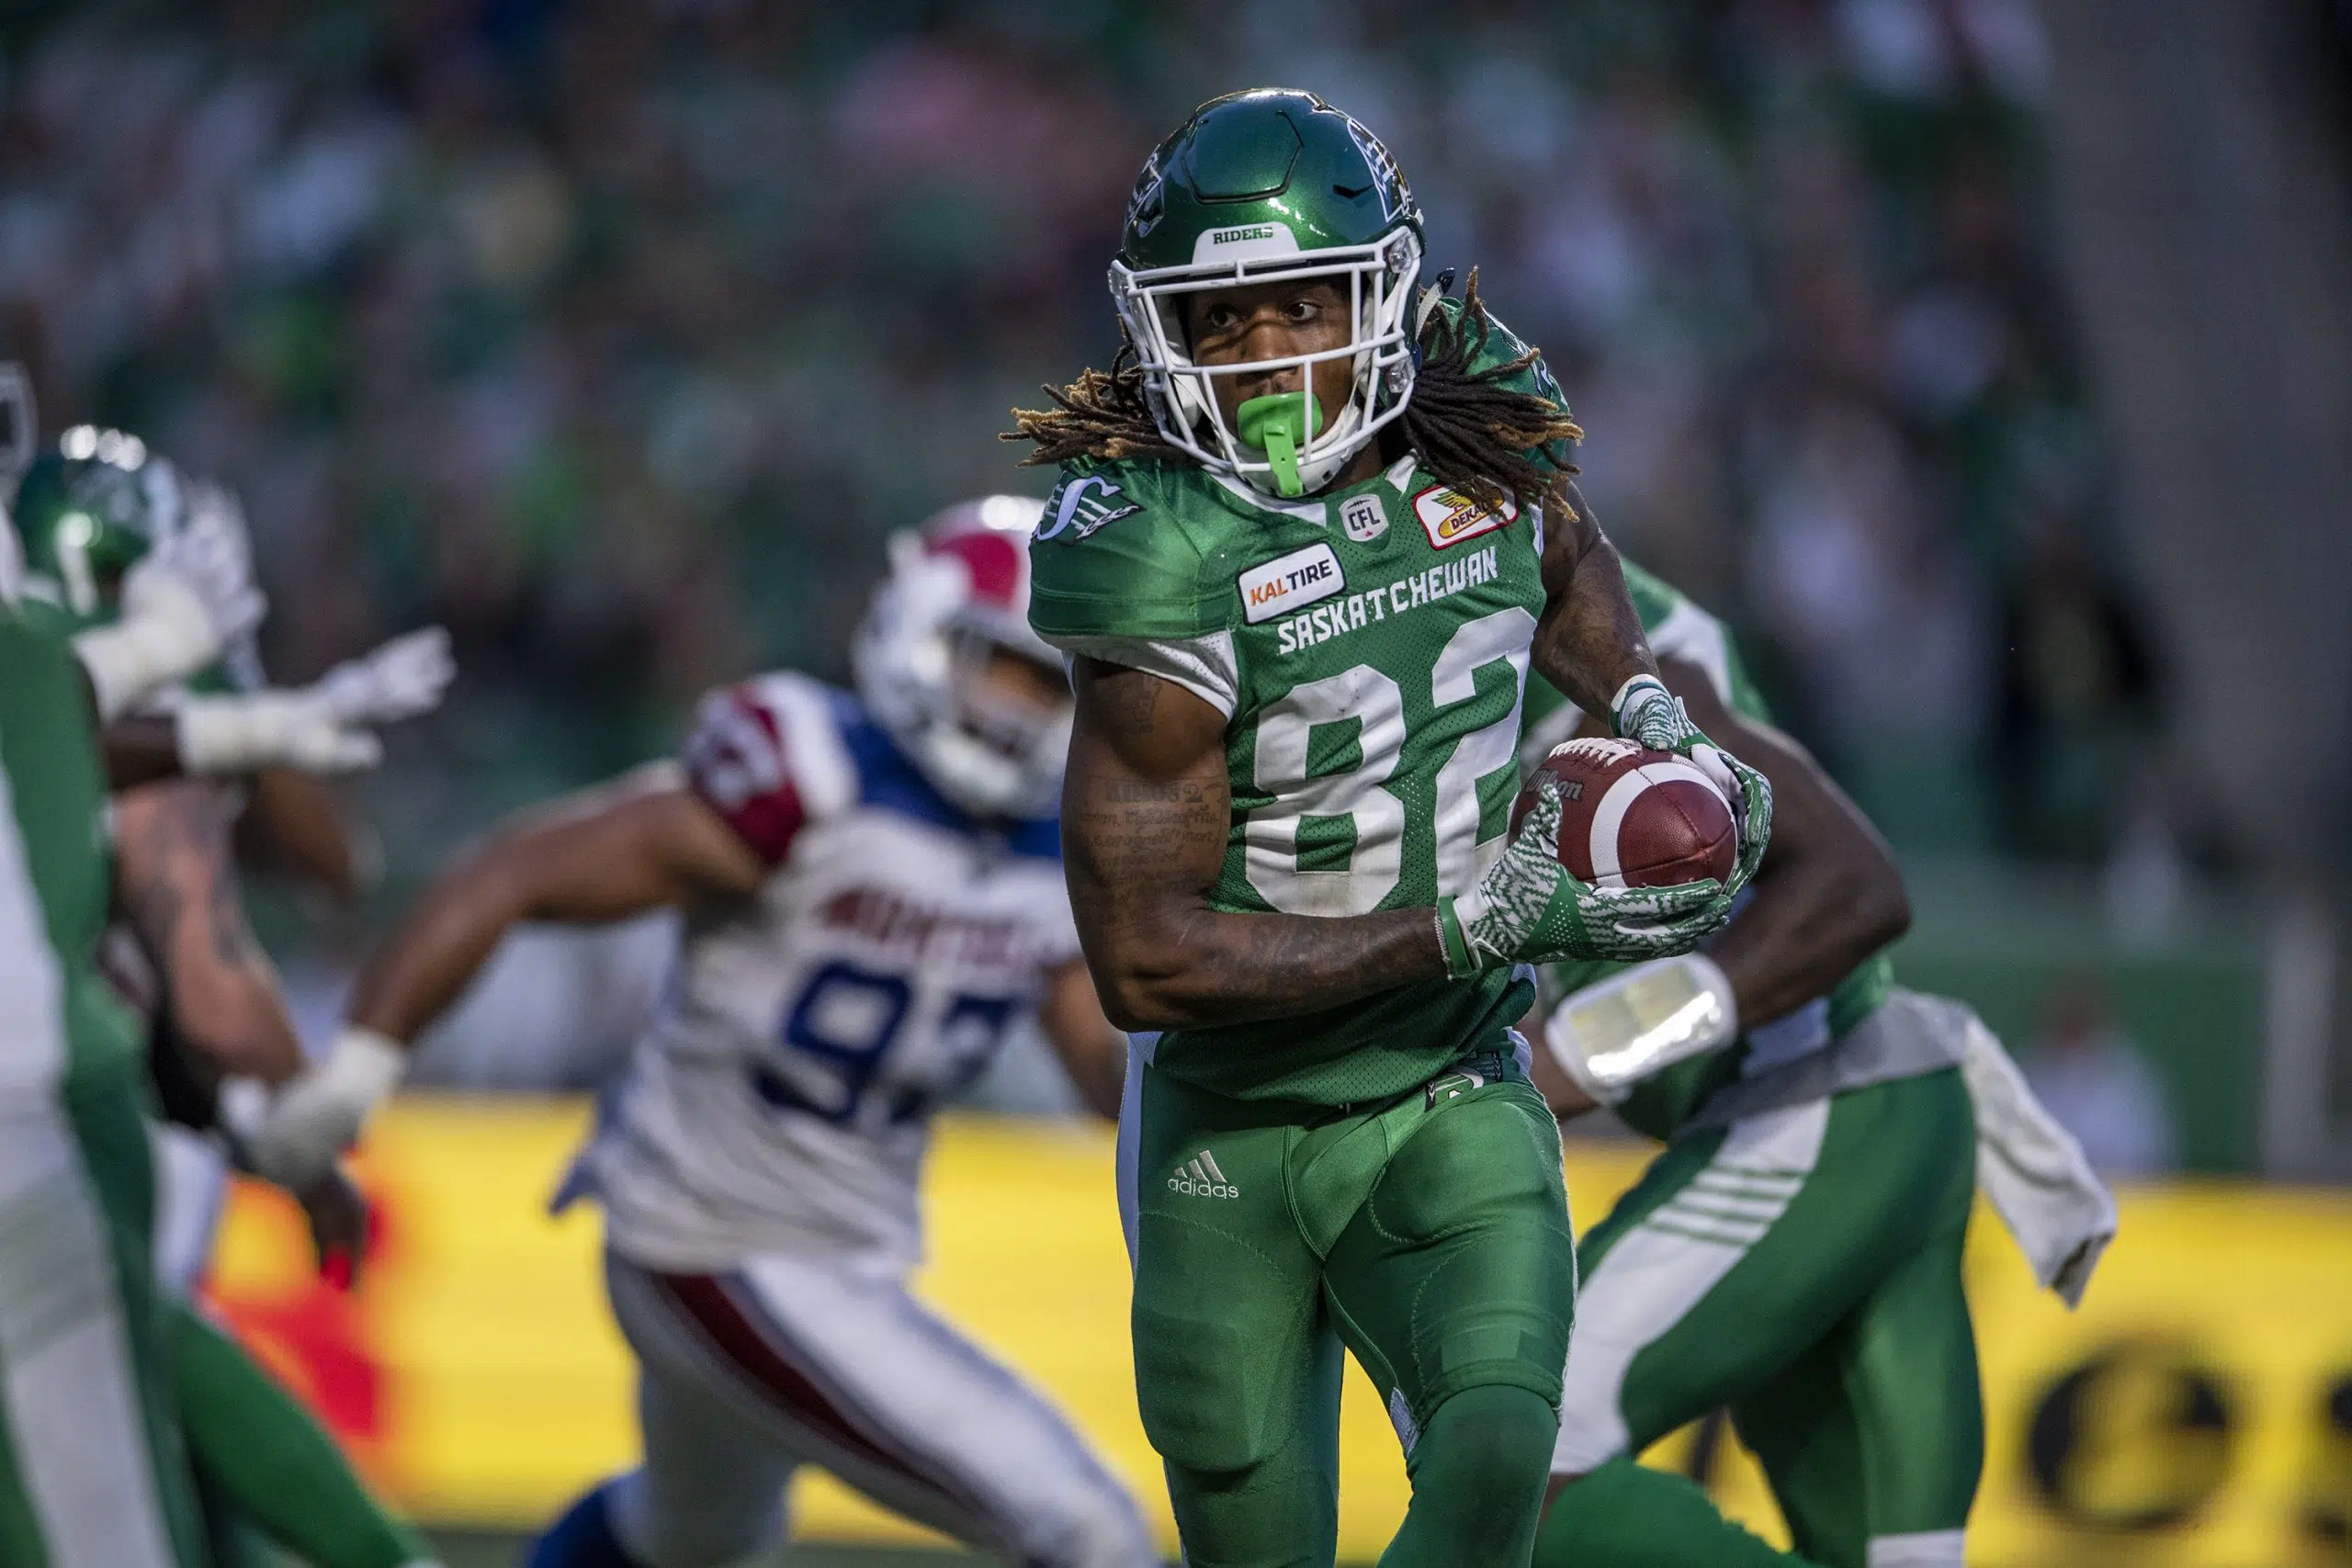 From NBA dreams to CFL success: Riders' Roosevelt a star